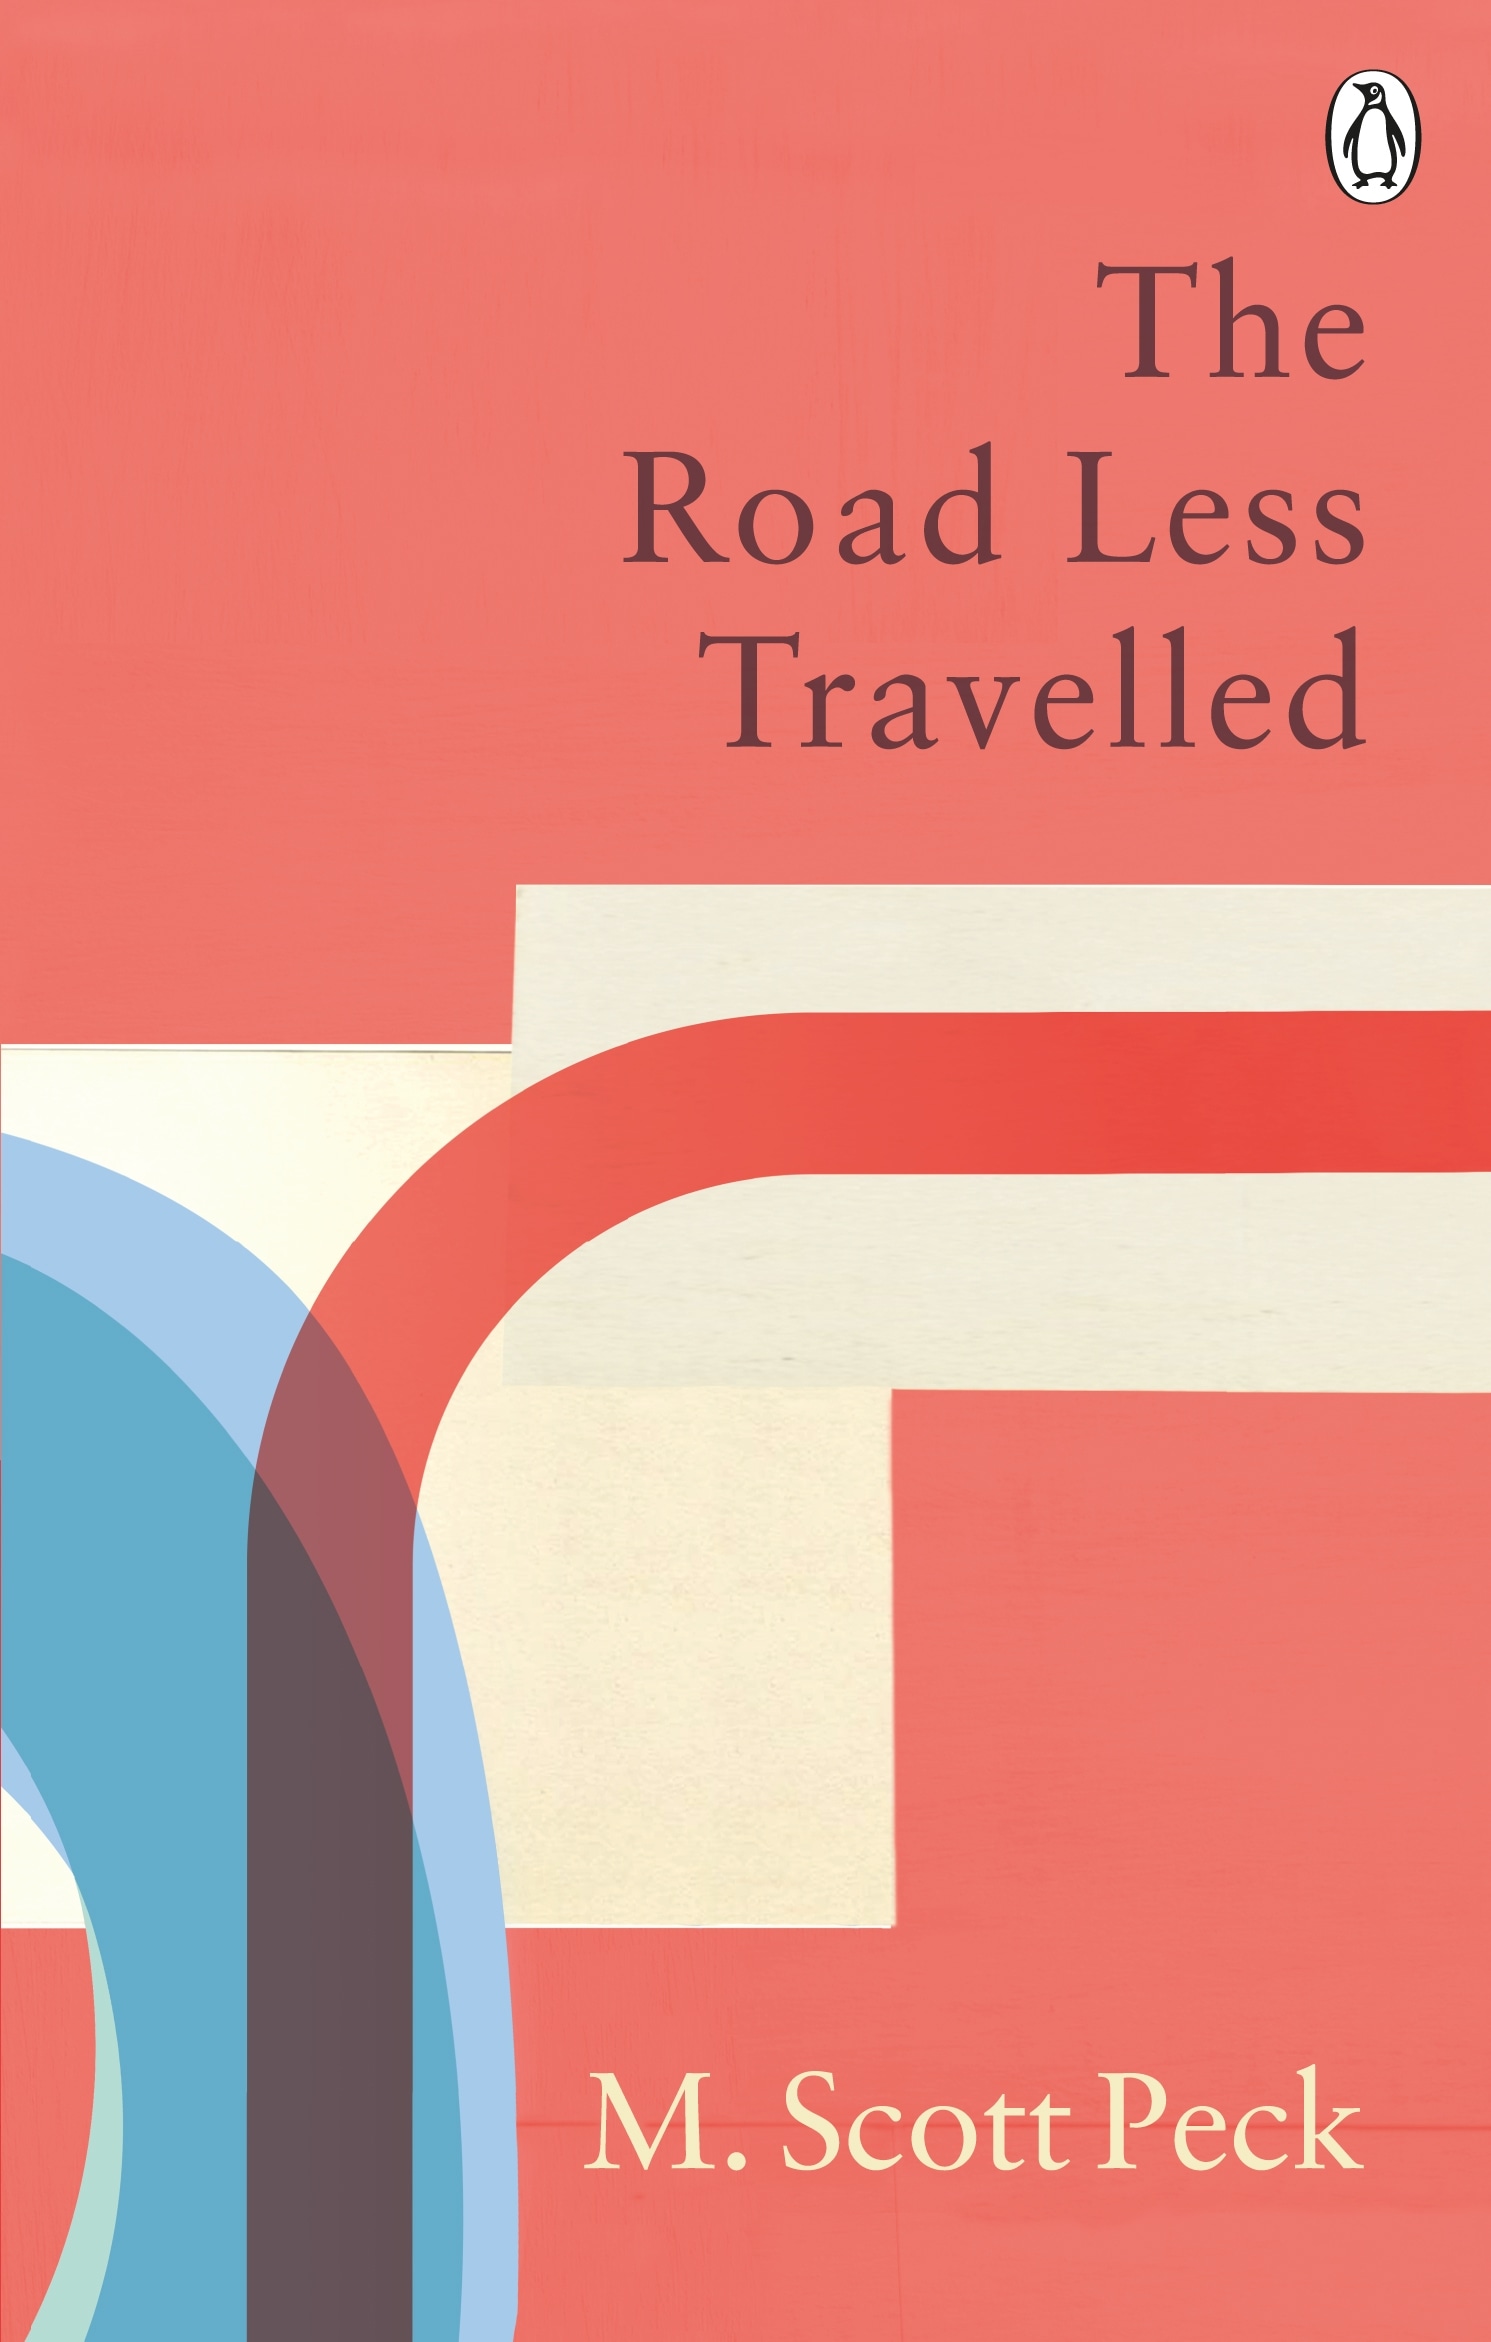 Book “The Road Less Travelled” by M. Scott Peck — January 7, 2021